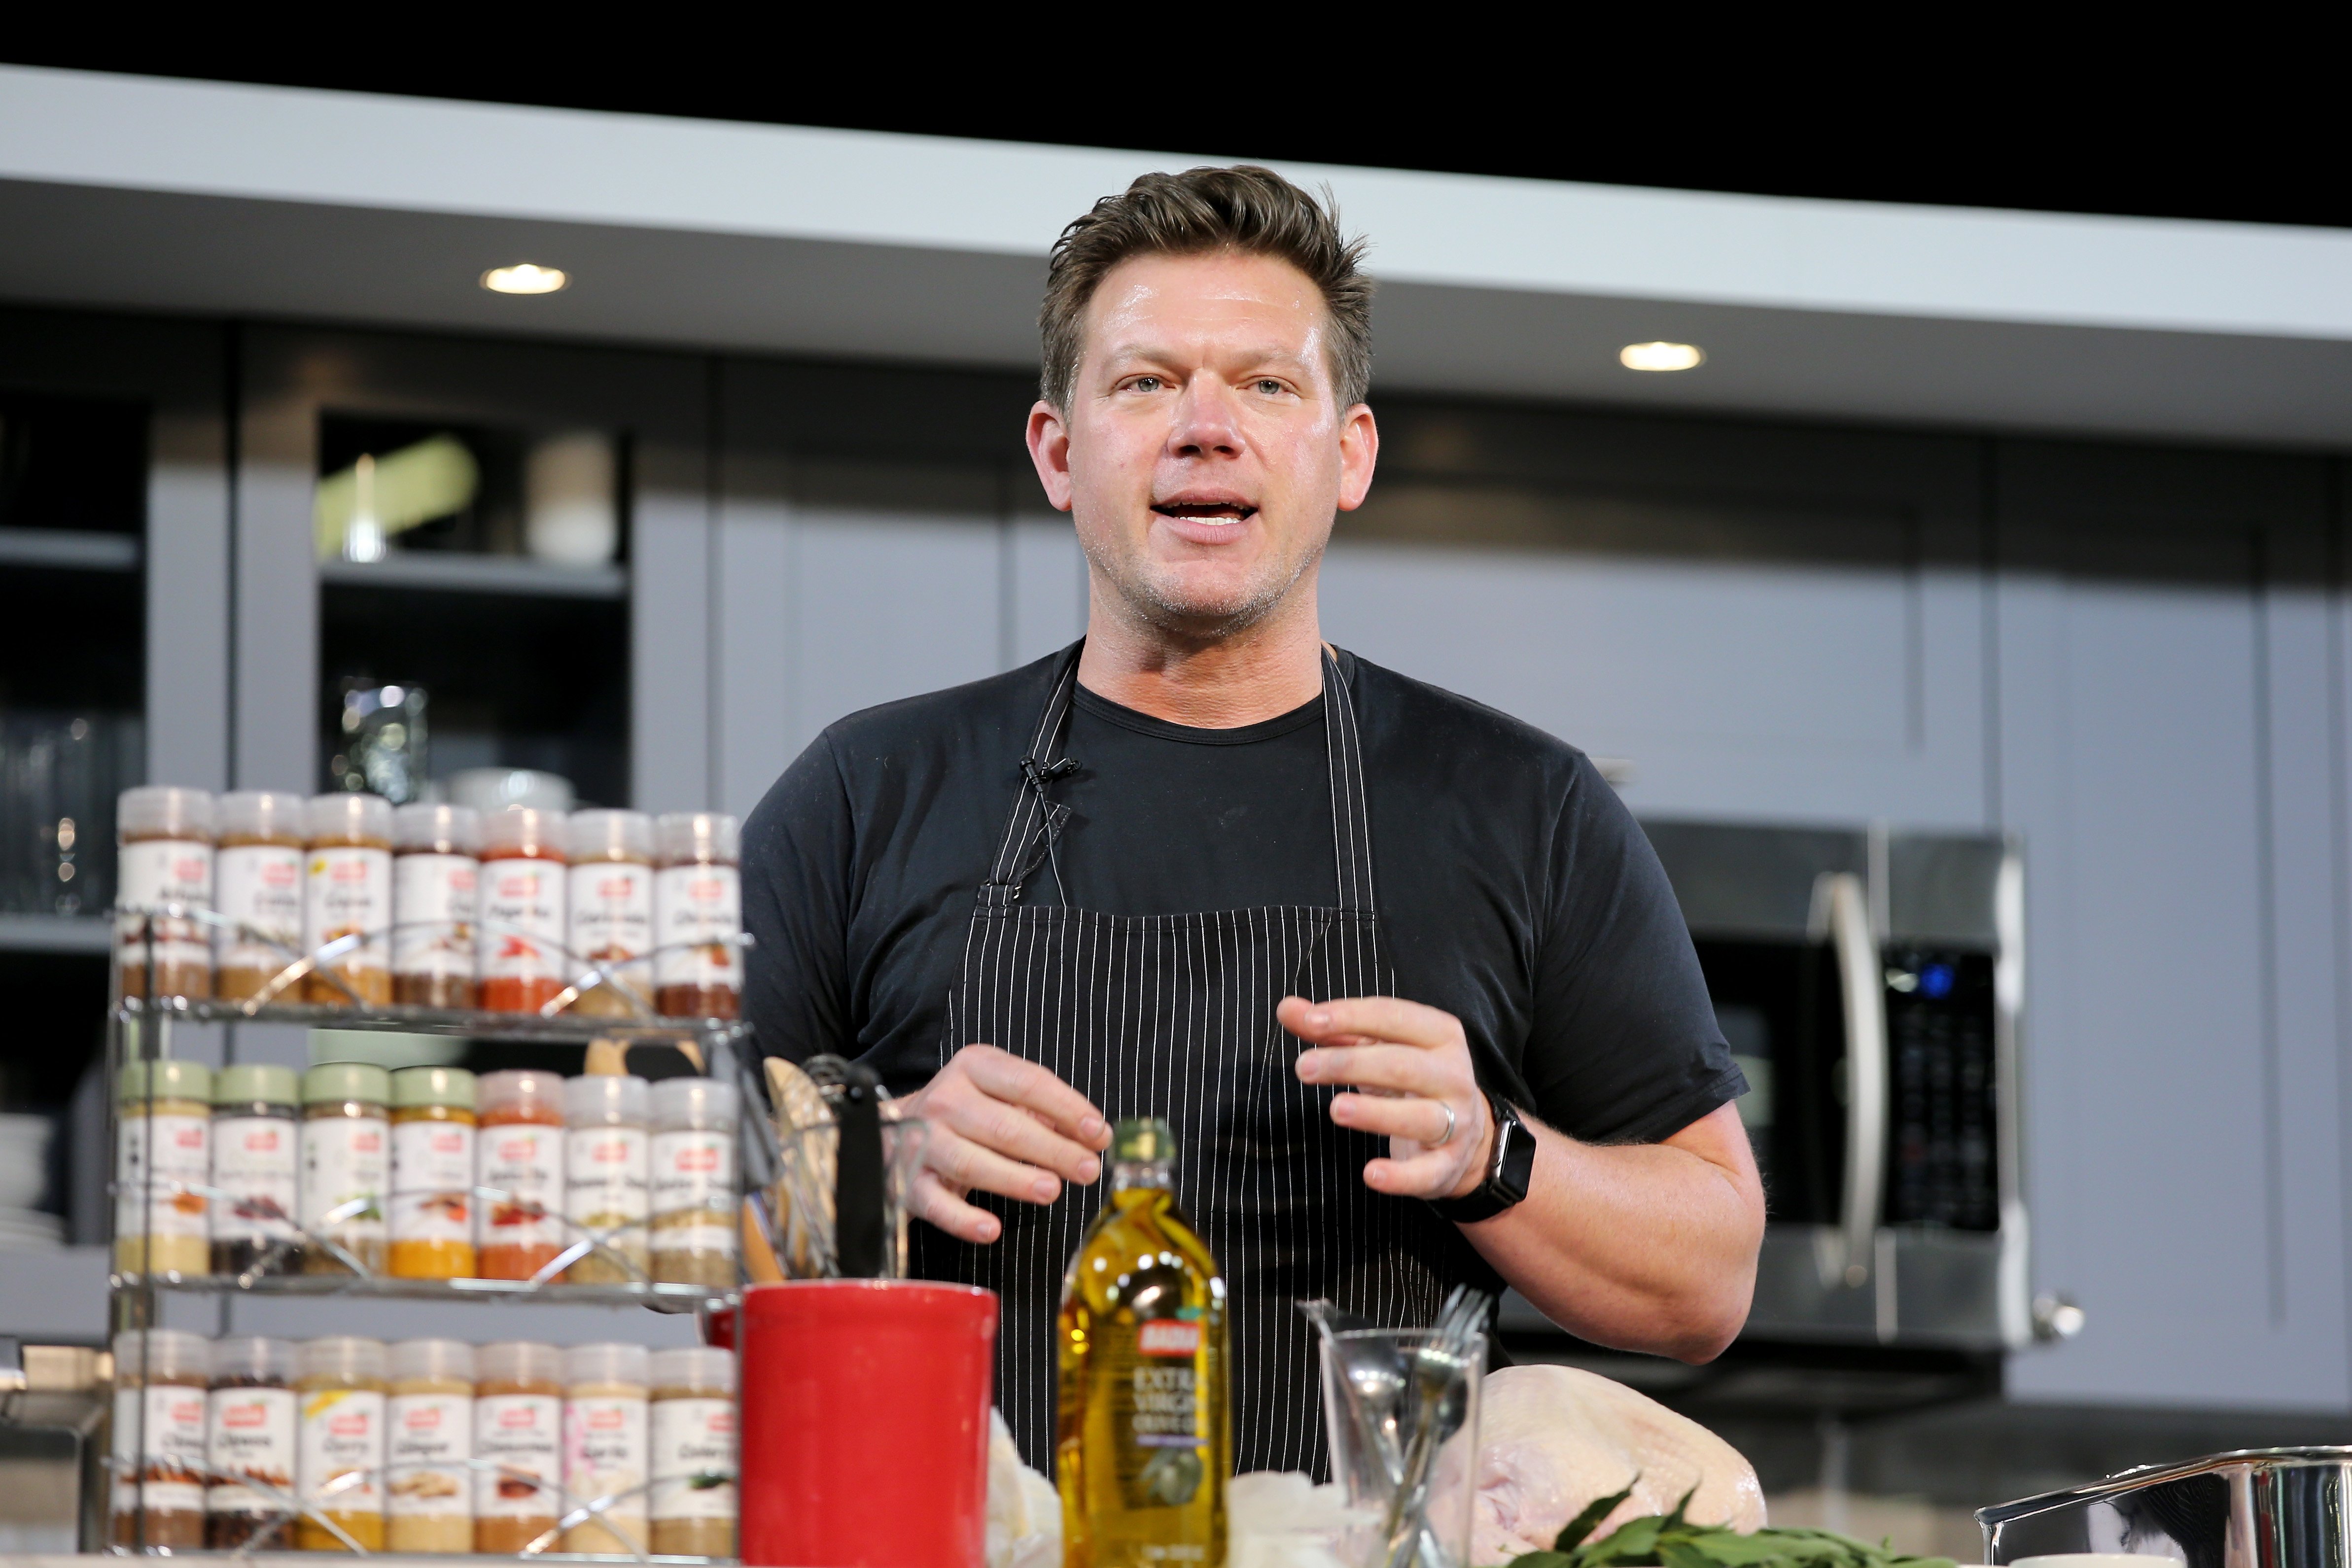 Food Network chef Tyler Florence wears a short-sleeved black tee-shirt in this photograph.